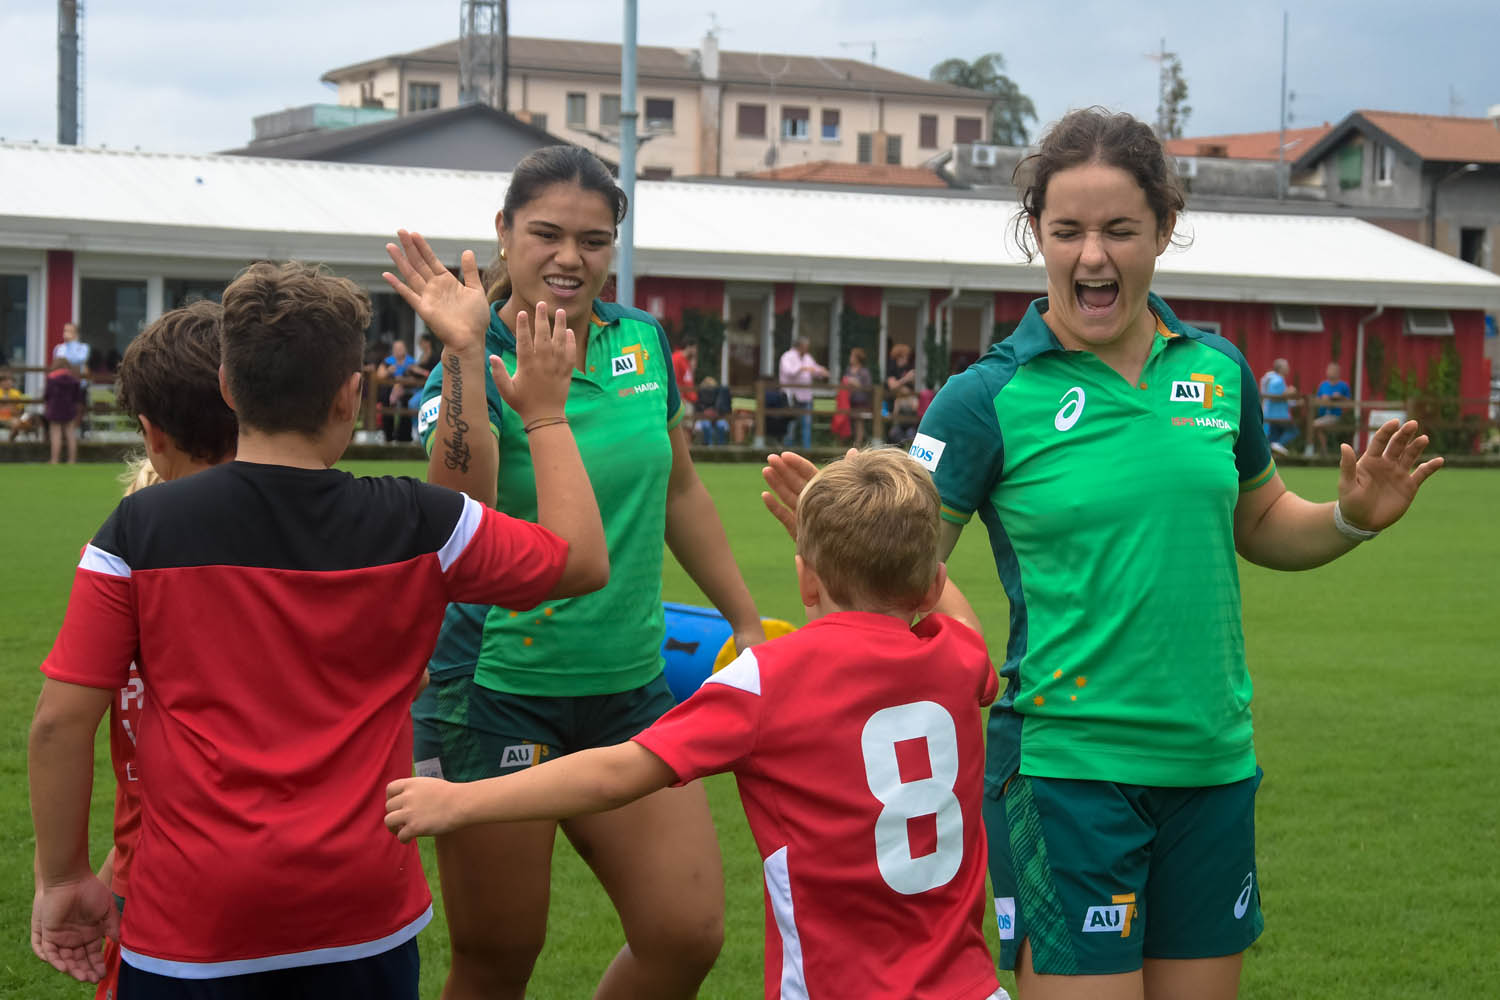 Aussie Rugby 7s players give children high fives